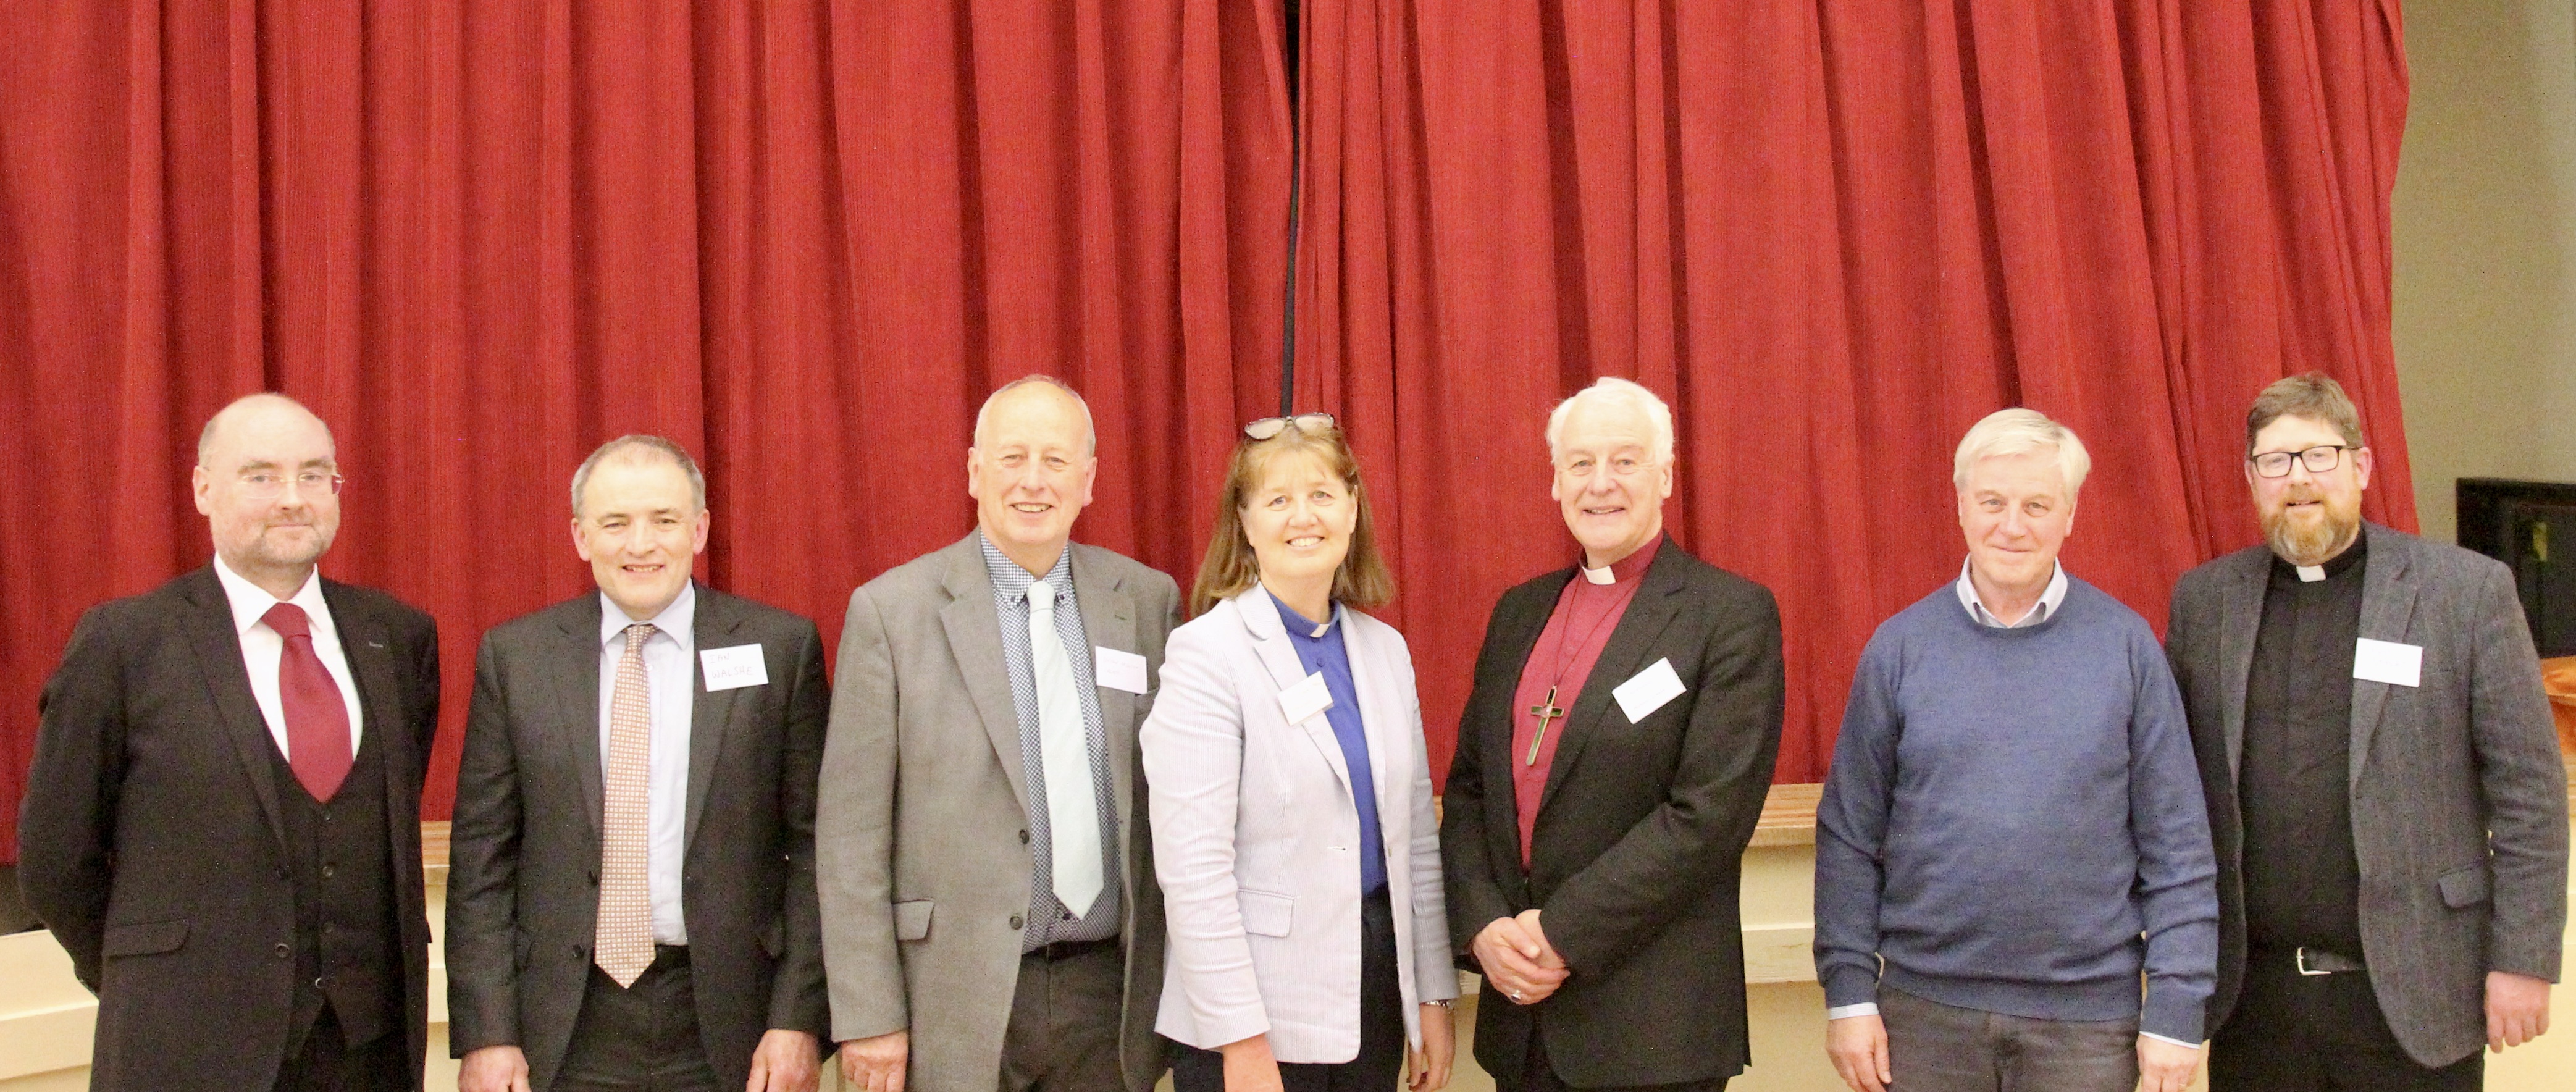 Ciaran Toland SC, Ian Walshe, Derek Neilson, the Revd Suzanne Harris, Archbishop Michael Jackson, Gordon Richards and Archdeacon Ross Styles after the special Glendalough Synod.